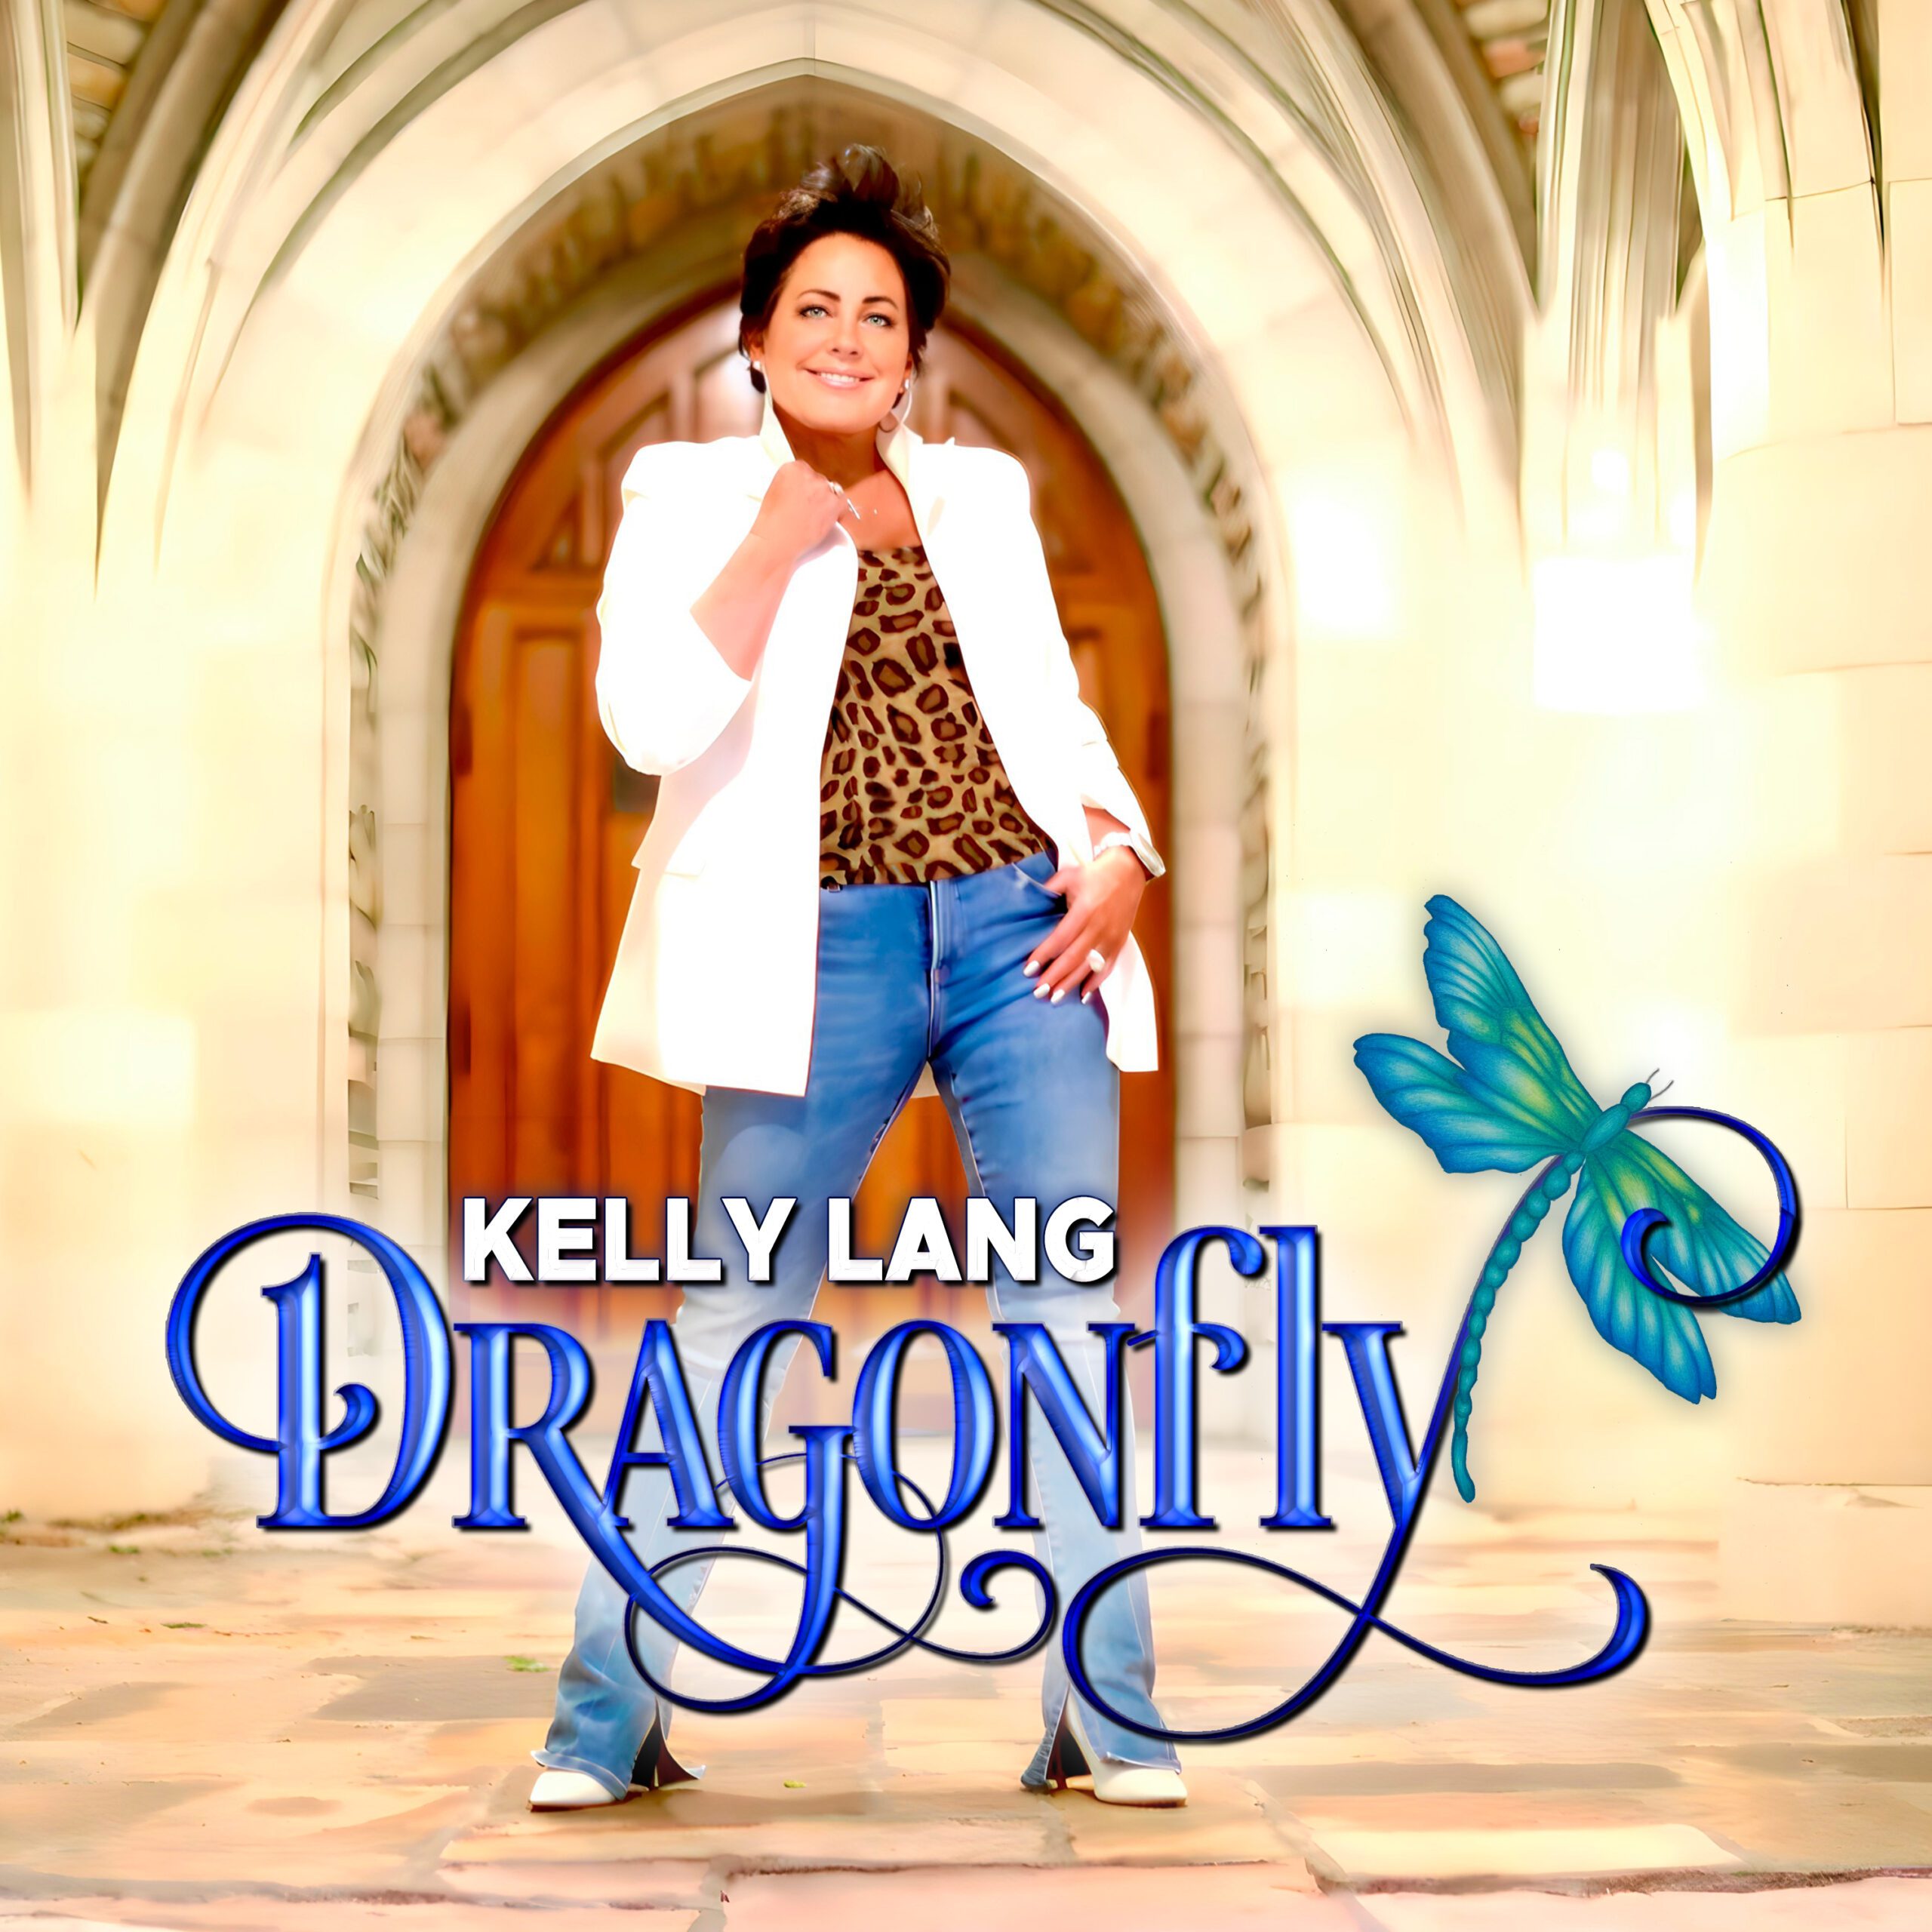 Music Premiere: Kelly Lang’s New Single “Dragonfly” Takes Flight Today!